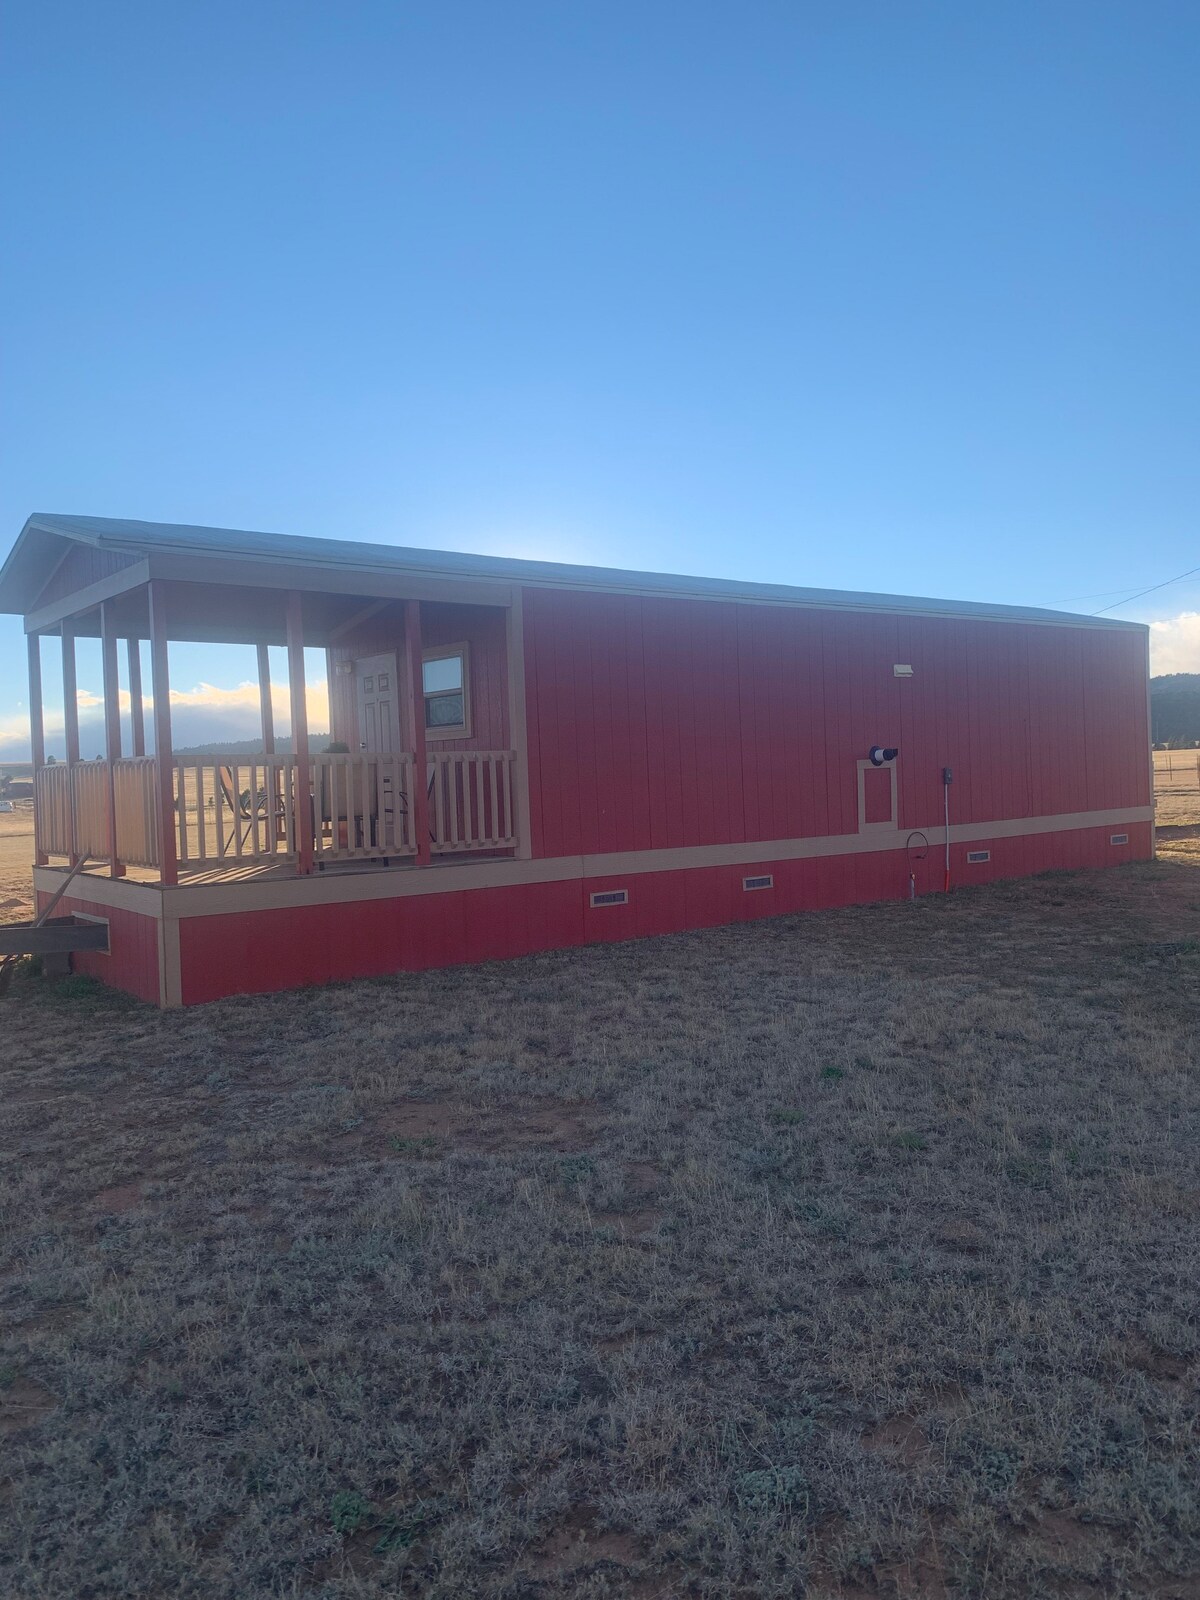 Bright One Bedroom Tiny Home on 2 Acres in Mora!